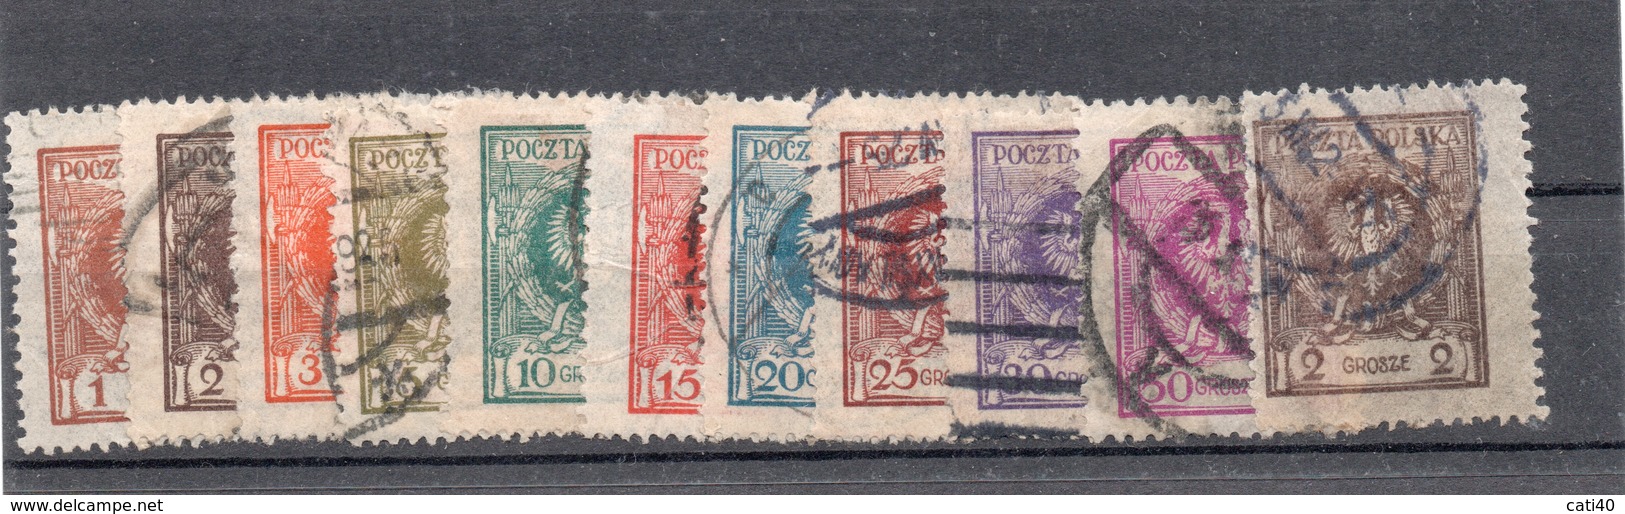 POLONIA POLOGNE 1921 STEMMA - Used Stamps